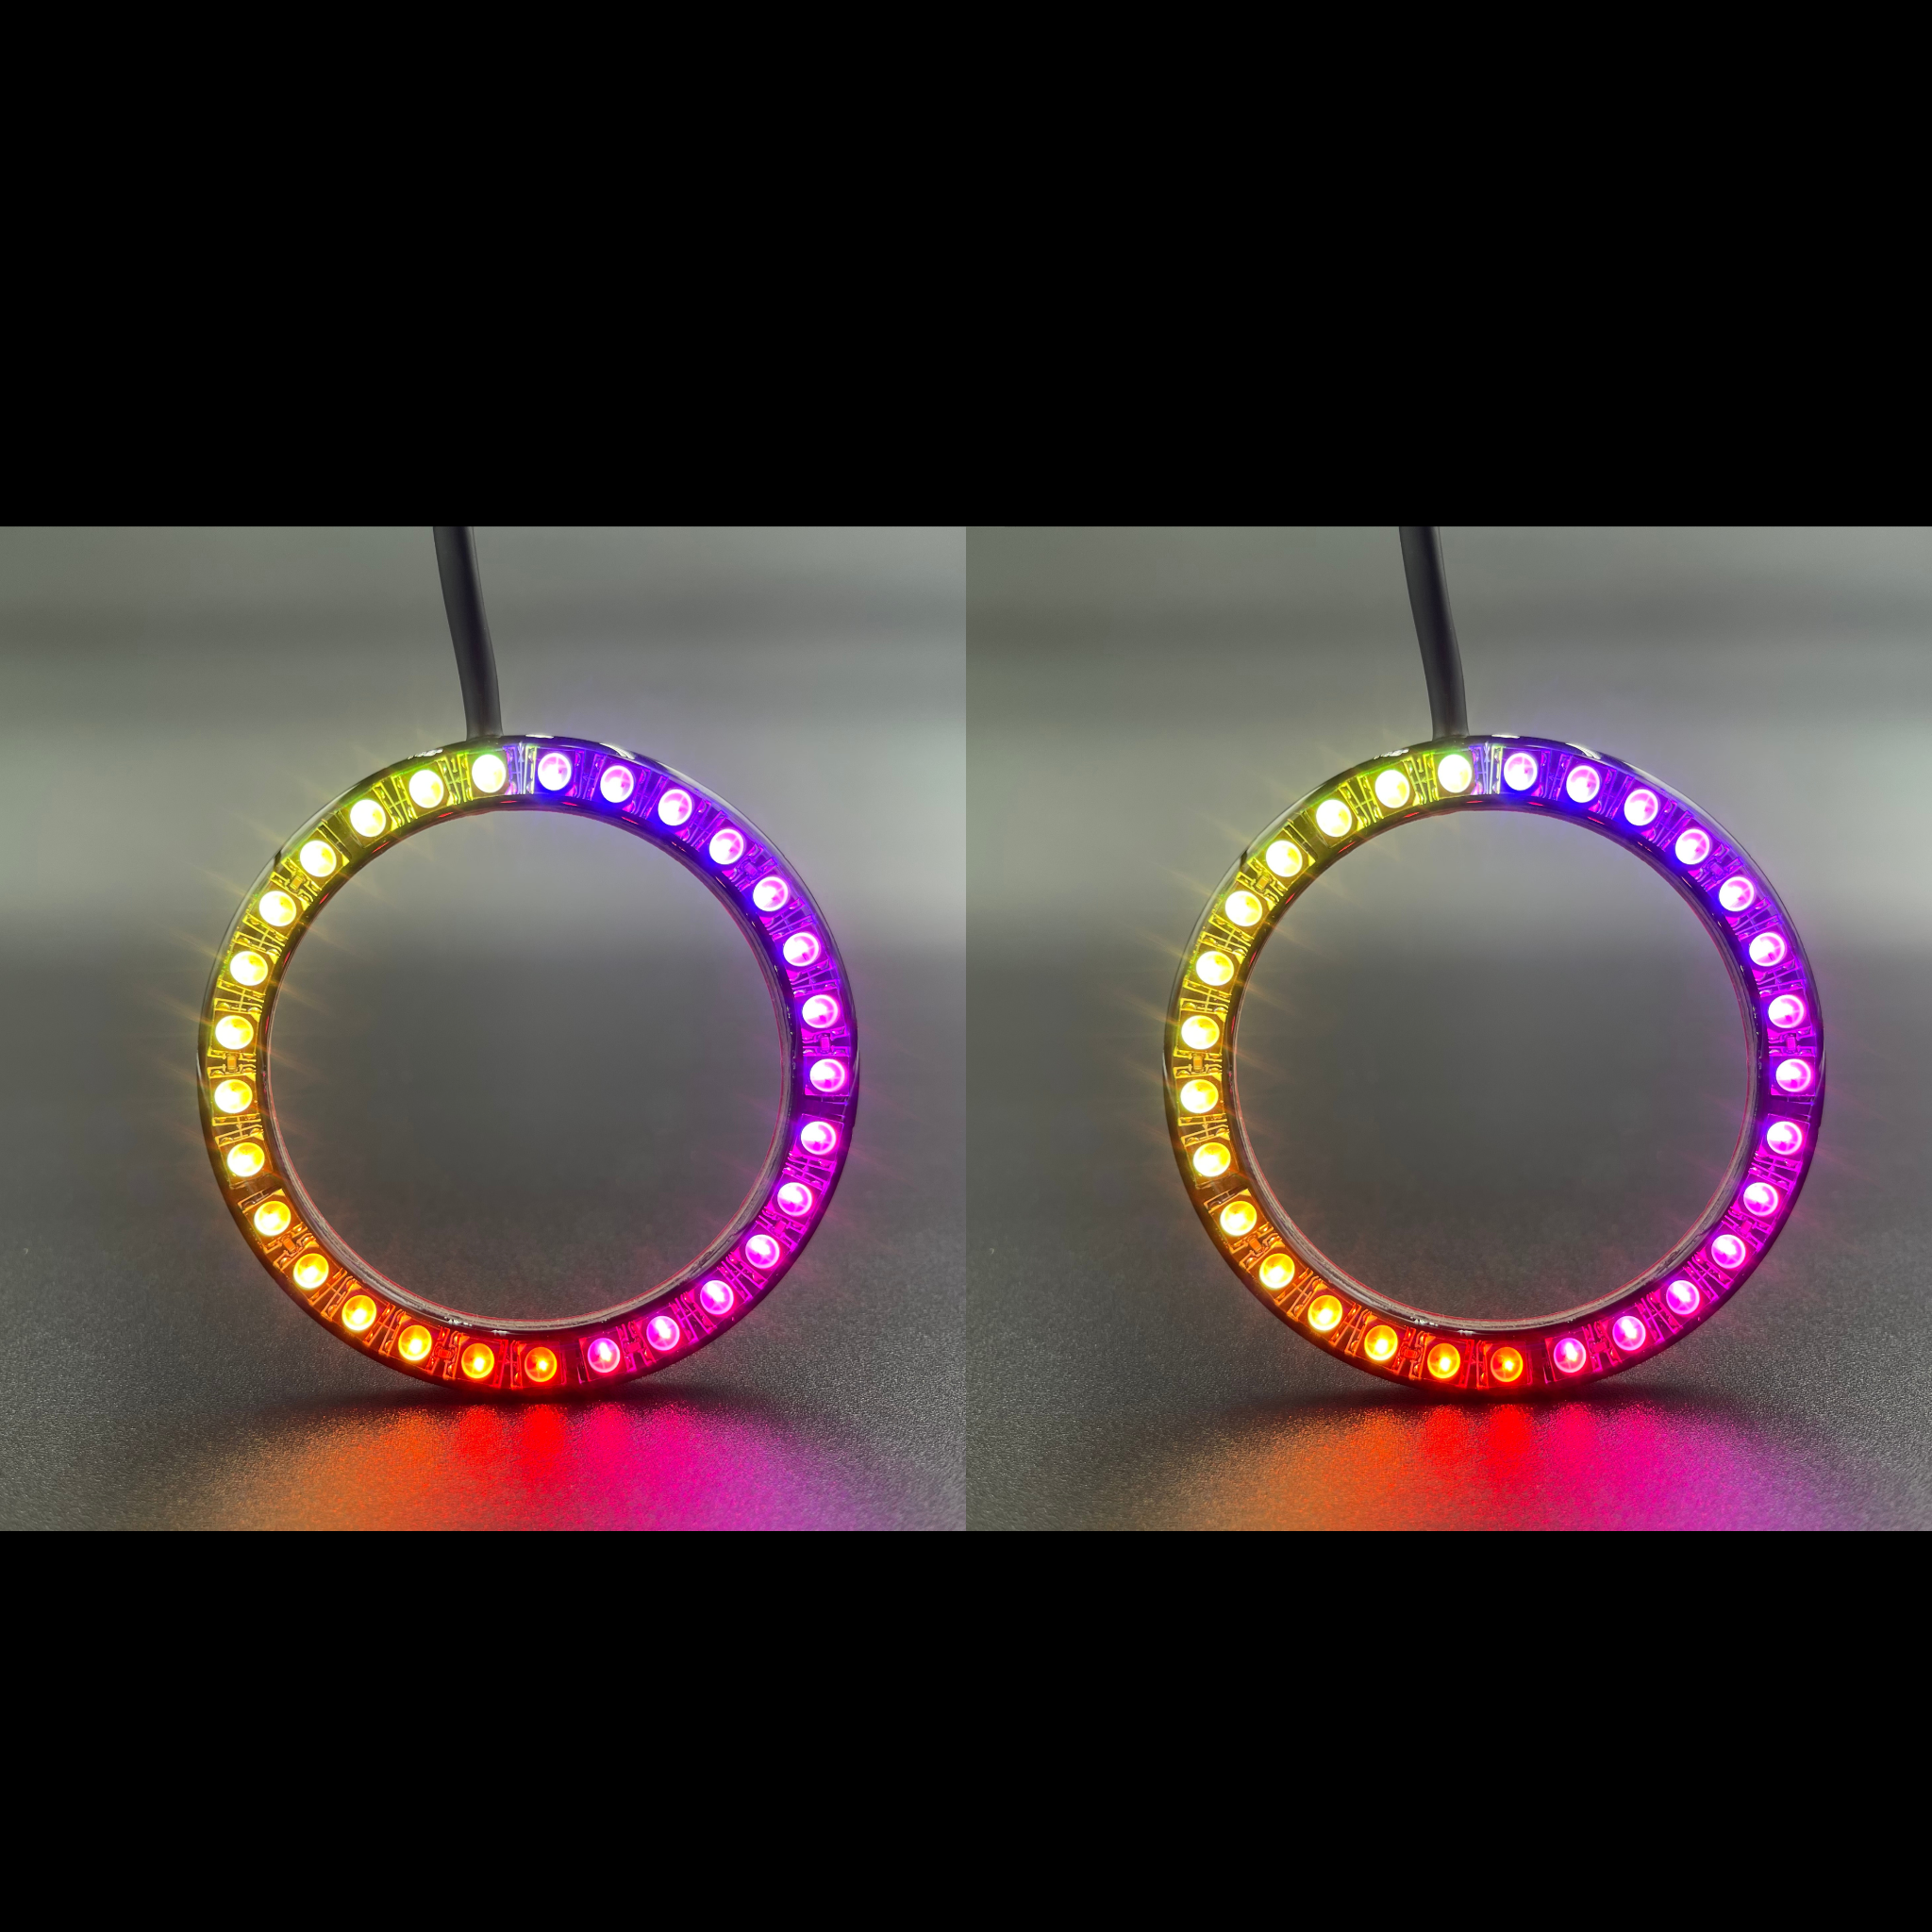 1998-2000 Nissan Frontier Multicolor Halo Kit - RGB Halo Kits Multicolor Flow Series Color Chasing RGBWA LED headlight kit Oracle Lighting Trendz OneUpLighting Morimoto theretrofitsource AutoLEDTech Diode Dynamics